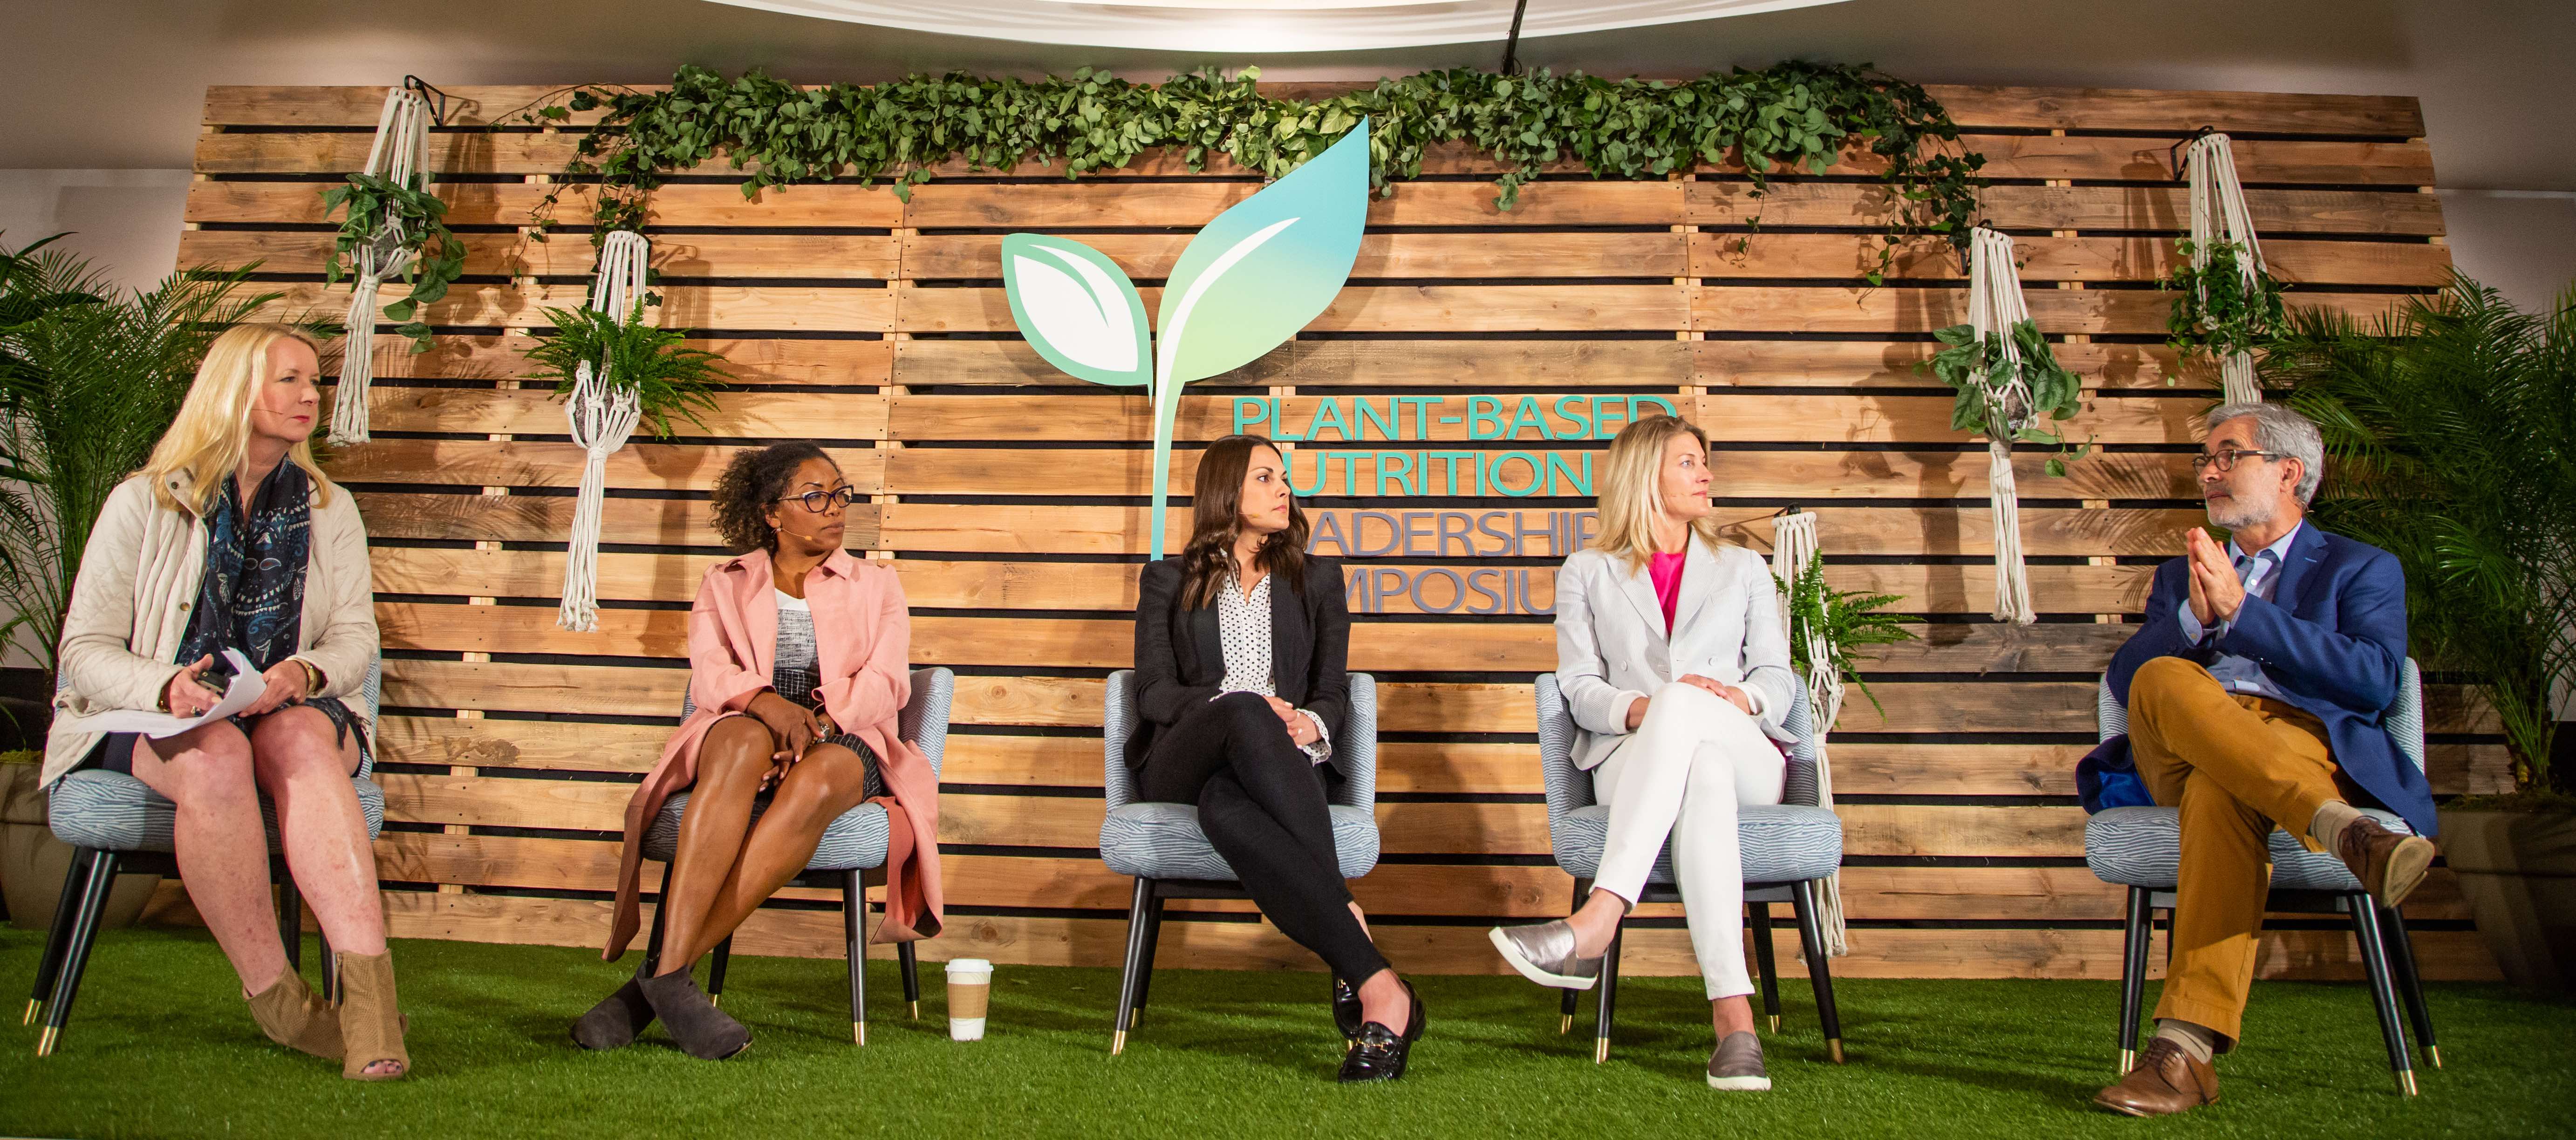 Panel Discussion at a scenic event in Los Angeles, California